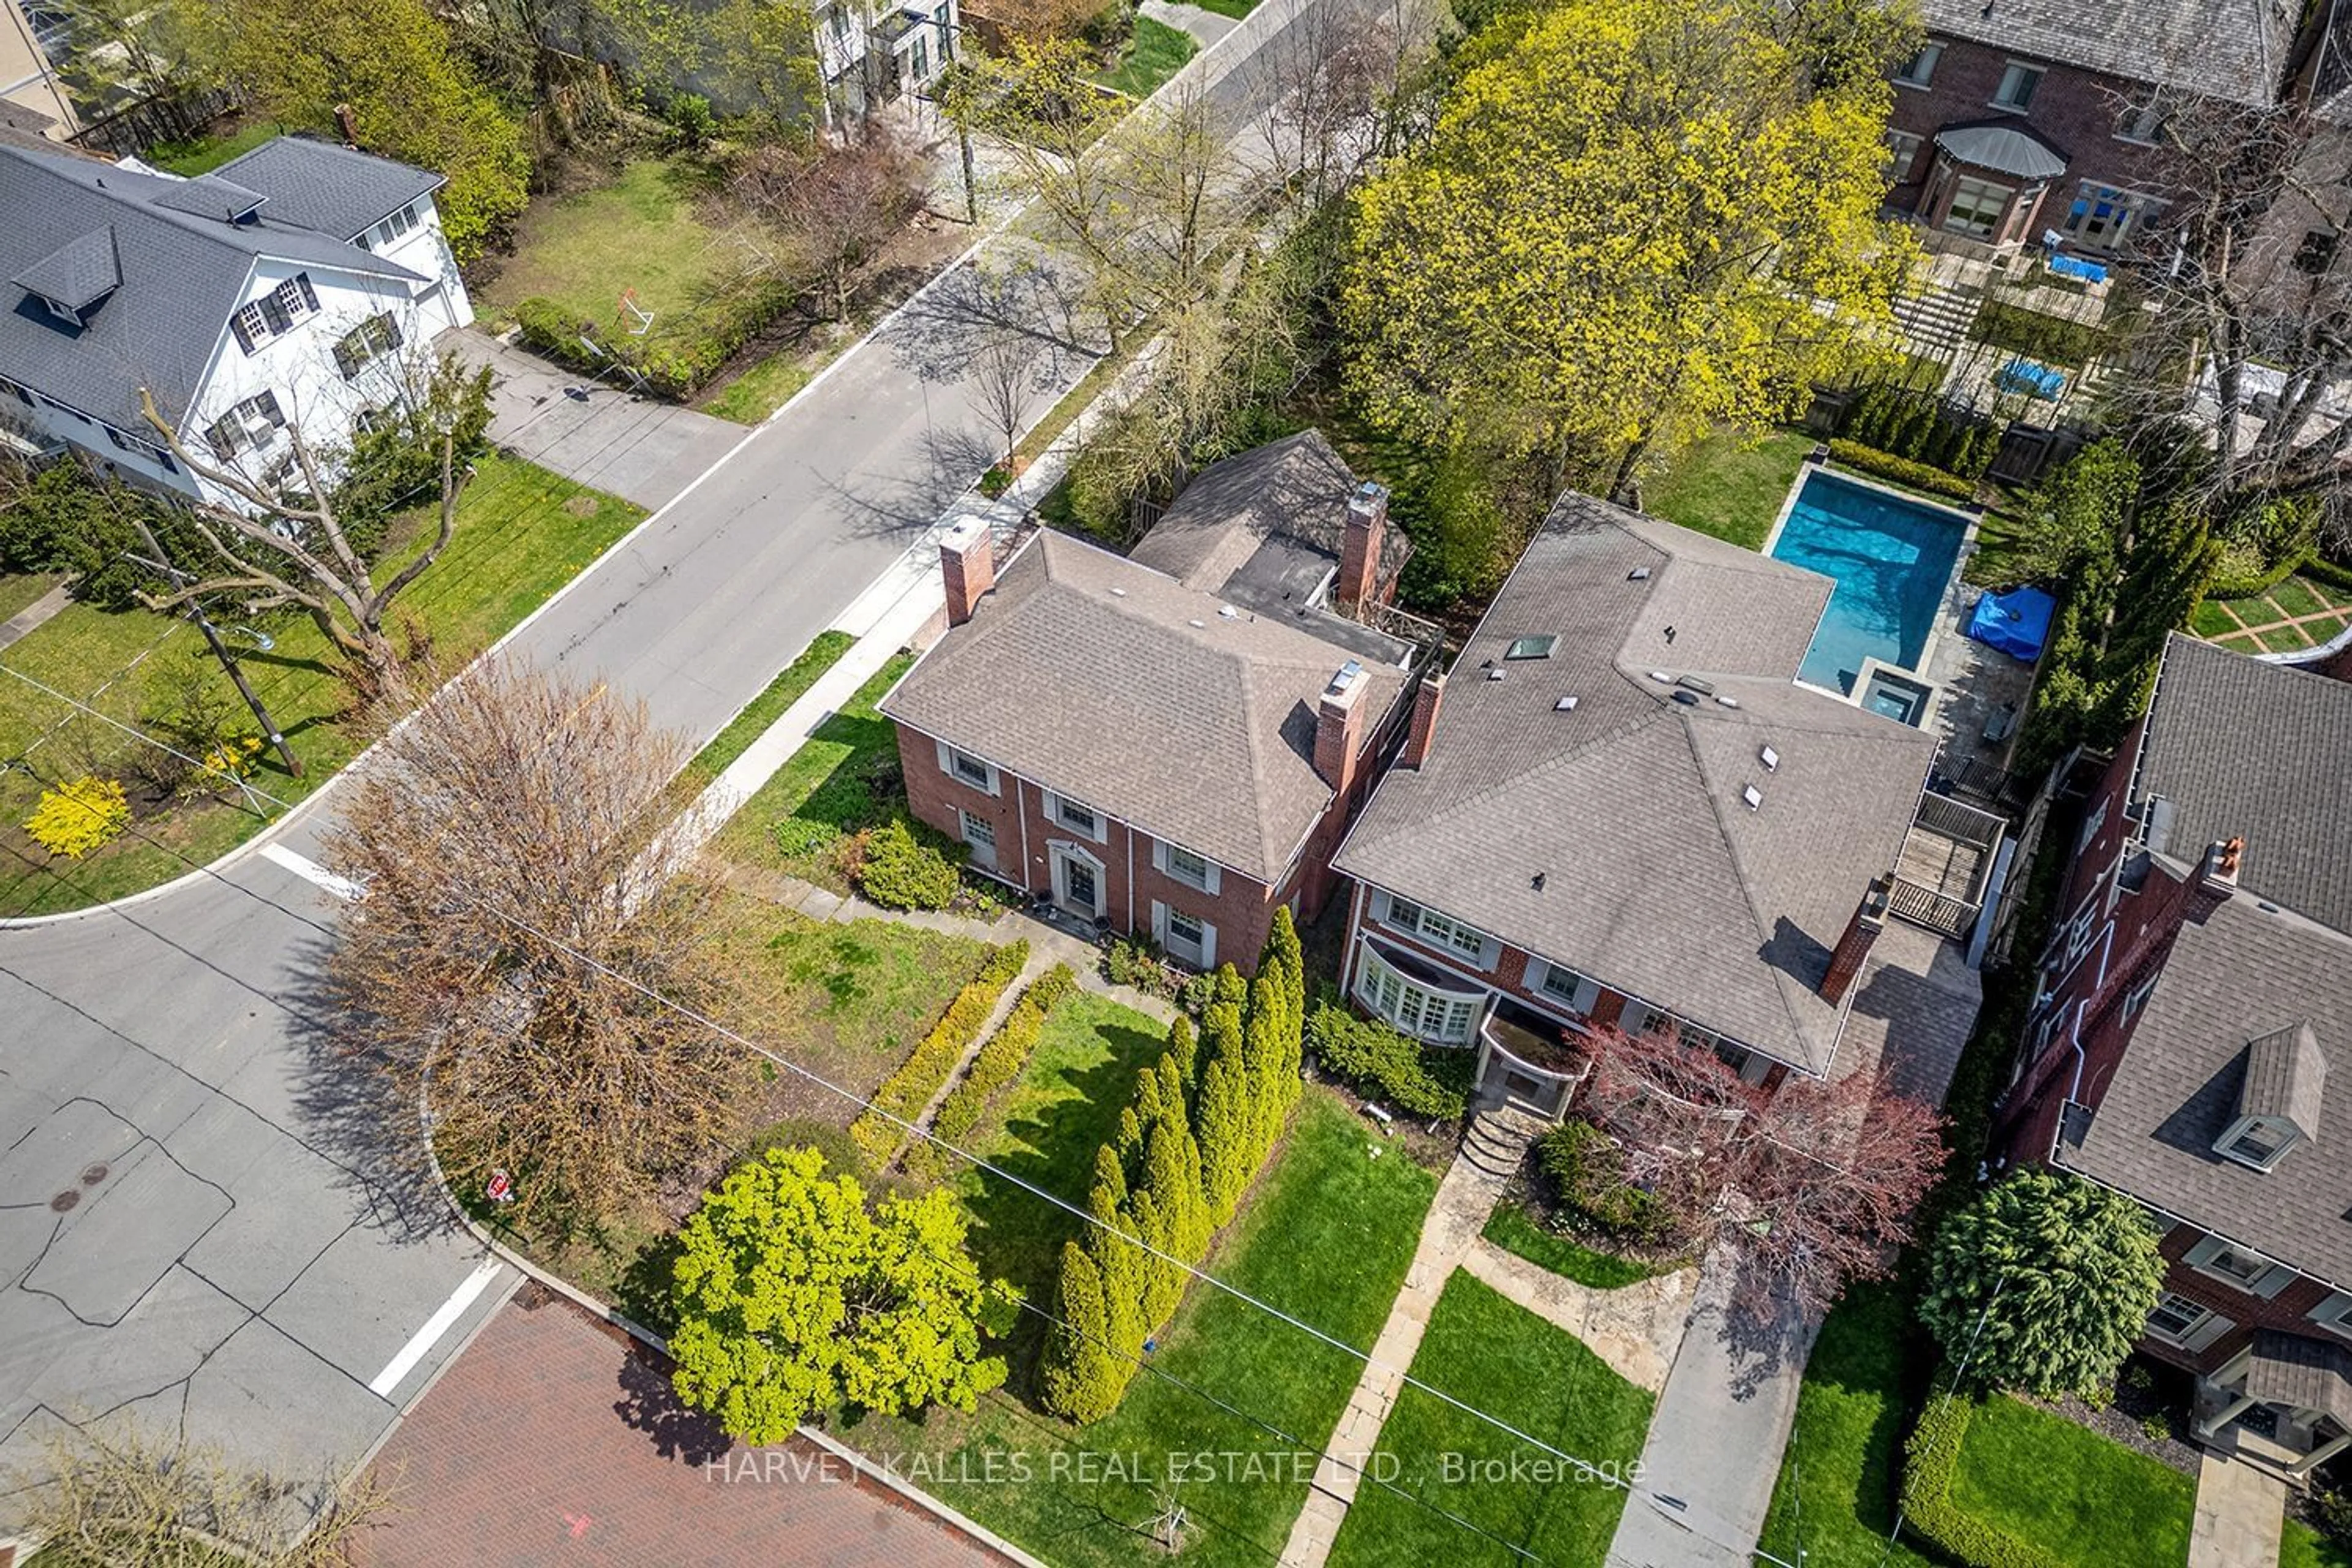 Frontside or backside of a home for 123 Glenayr Rd, Toronto Ontario M5P 3C1